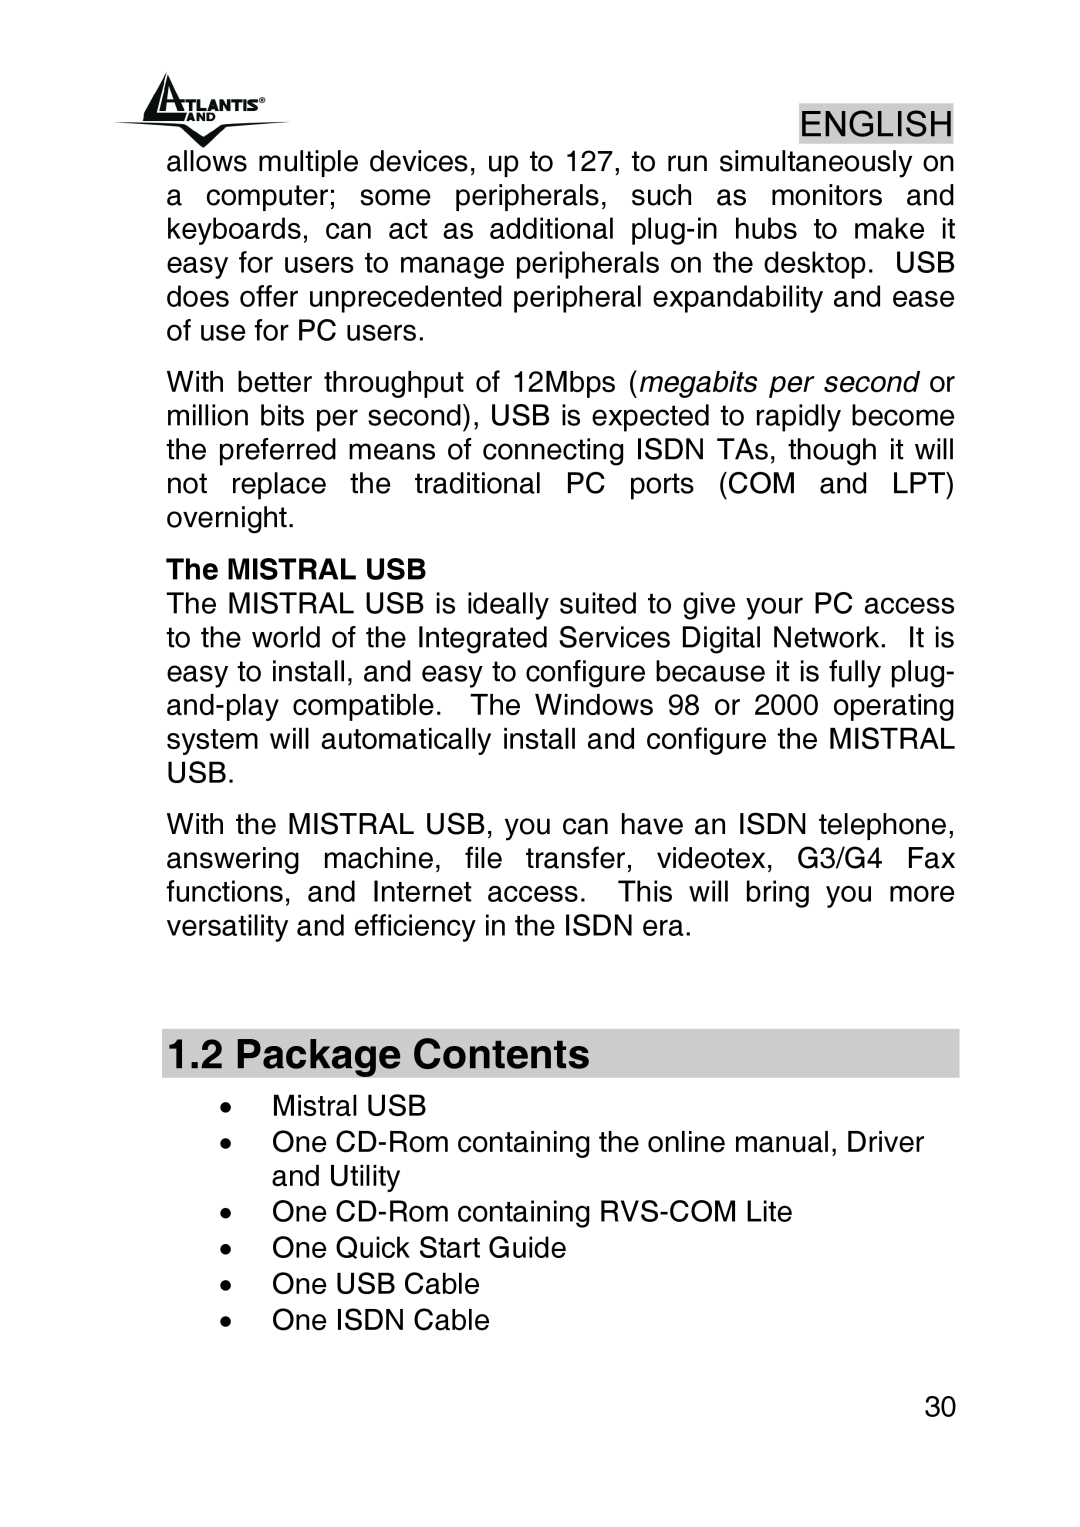 Atlantis Land A01-IU1 manual Package Contents, The MISTRAL USB 